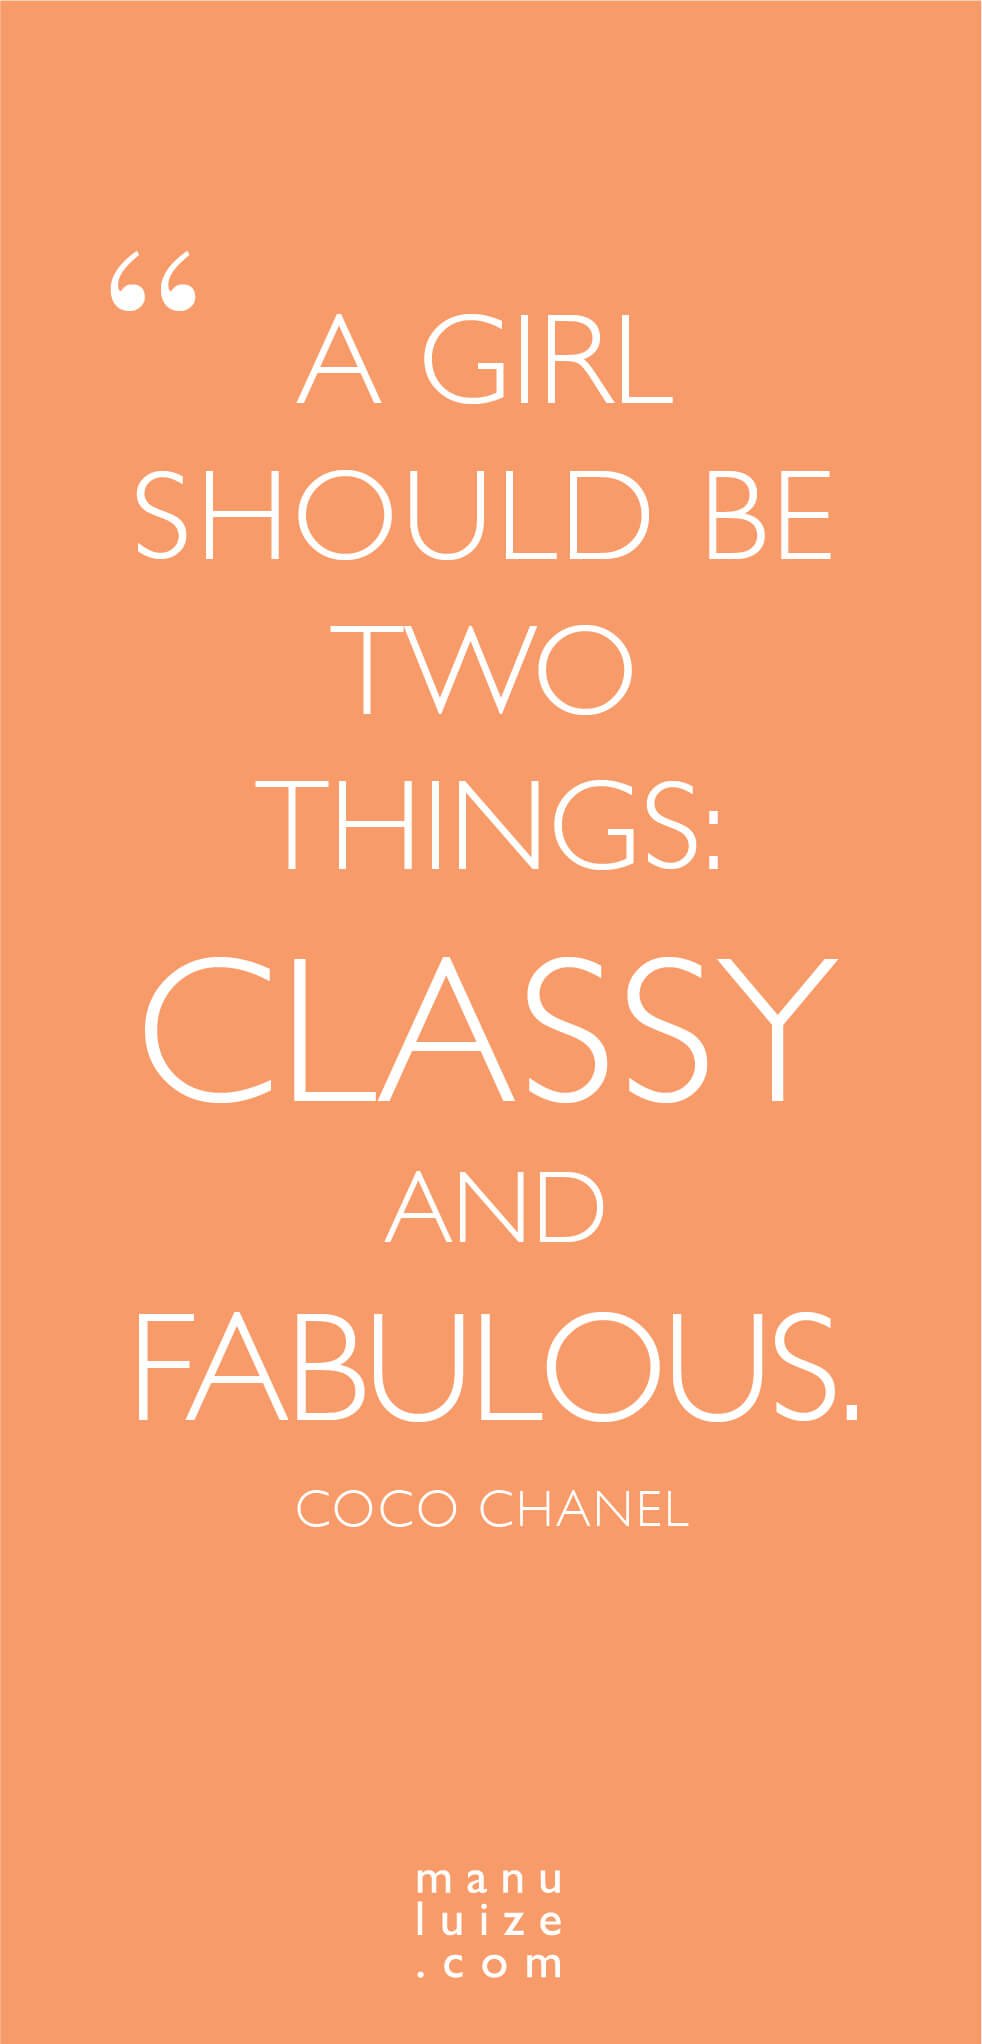 Chanel quote: classy and fabulous